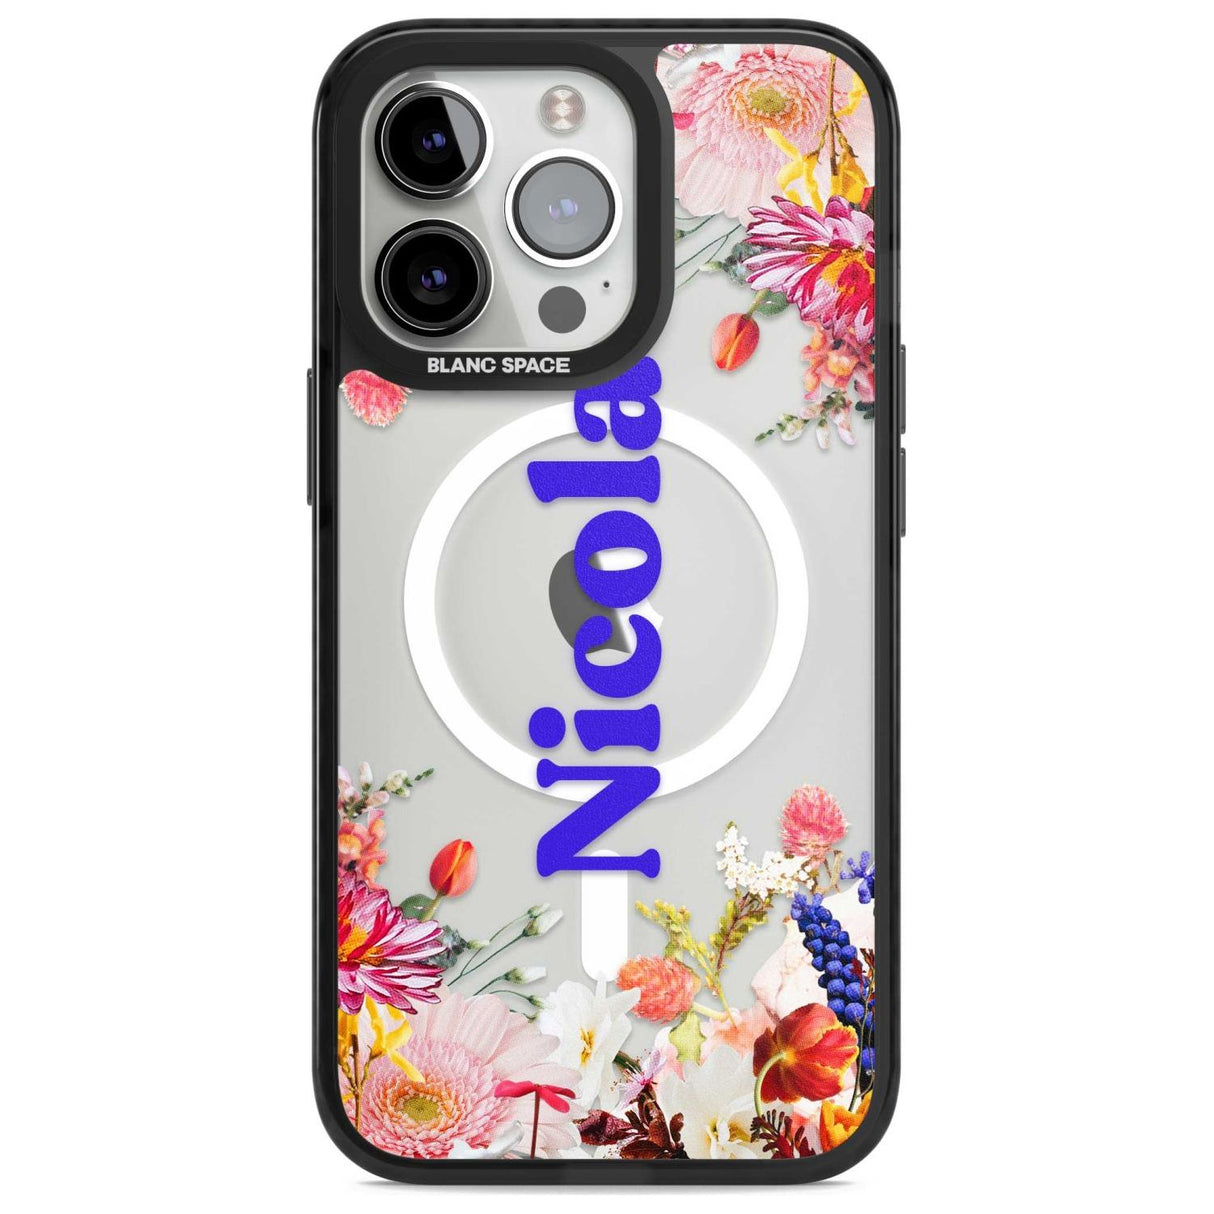 Personalised Text with Floral Borders Custom Phone Case iPhone 15 Pro Max / Magsafe Black Impact Case,iPhone 15 Pro / Magsafe Black Impact Case,iPhone 14 Pro Max / Magsafe Black Impact Case,iPhone 14 Pro / Magsafe Black Impact Case,iPhone 13 Pro / Magsafe Black Impact Case Blanc Space